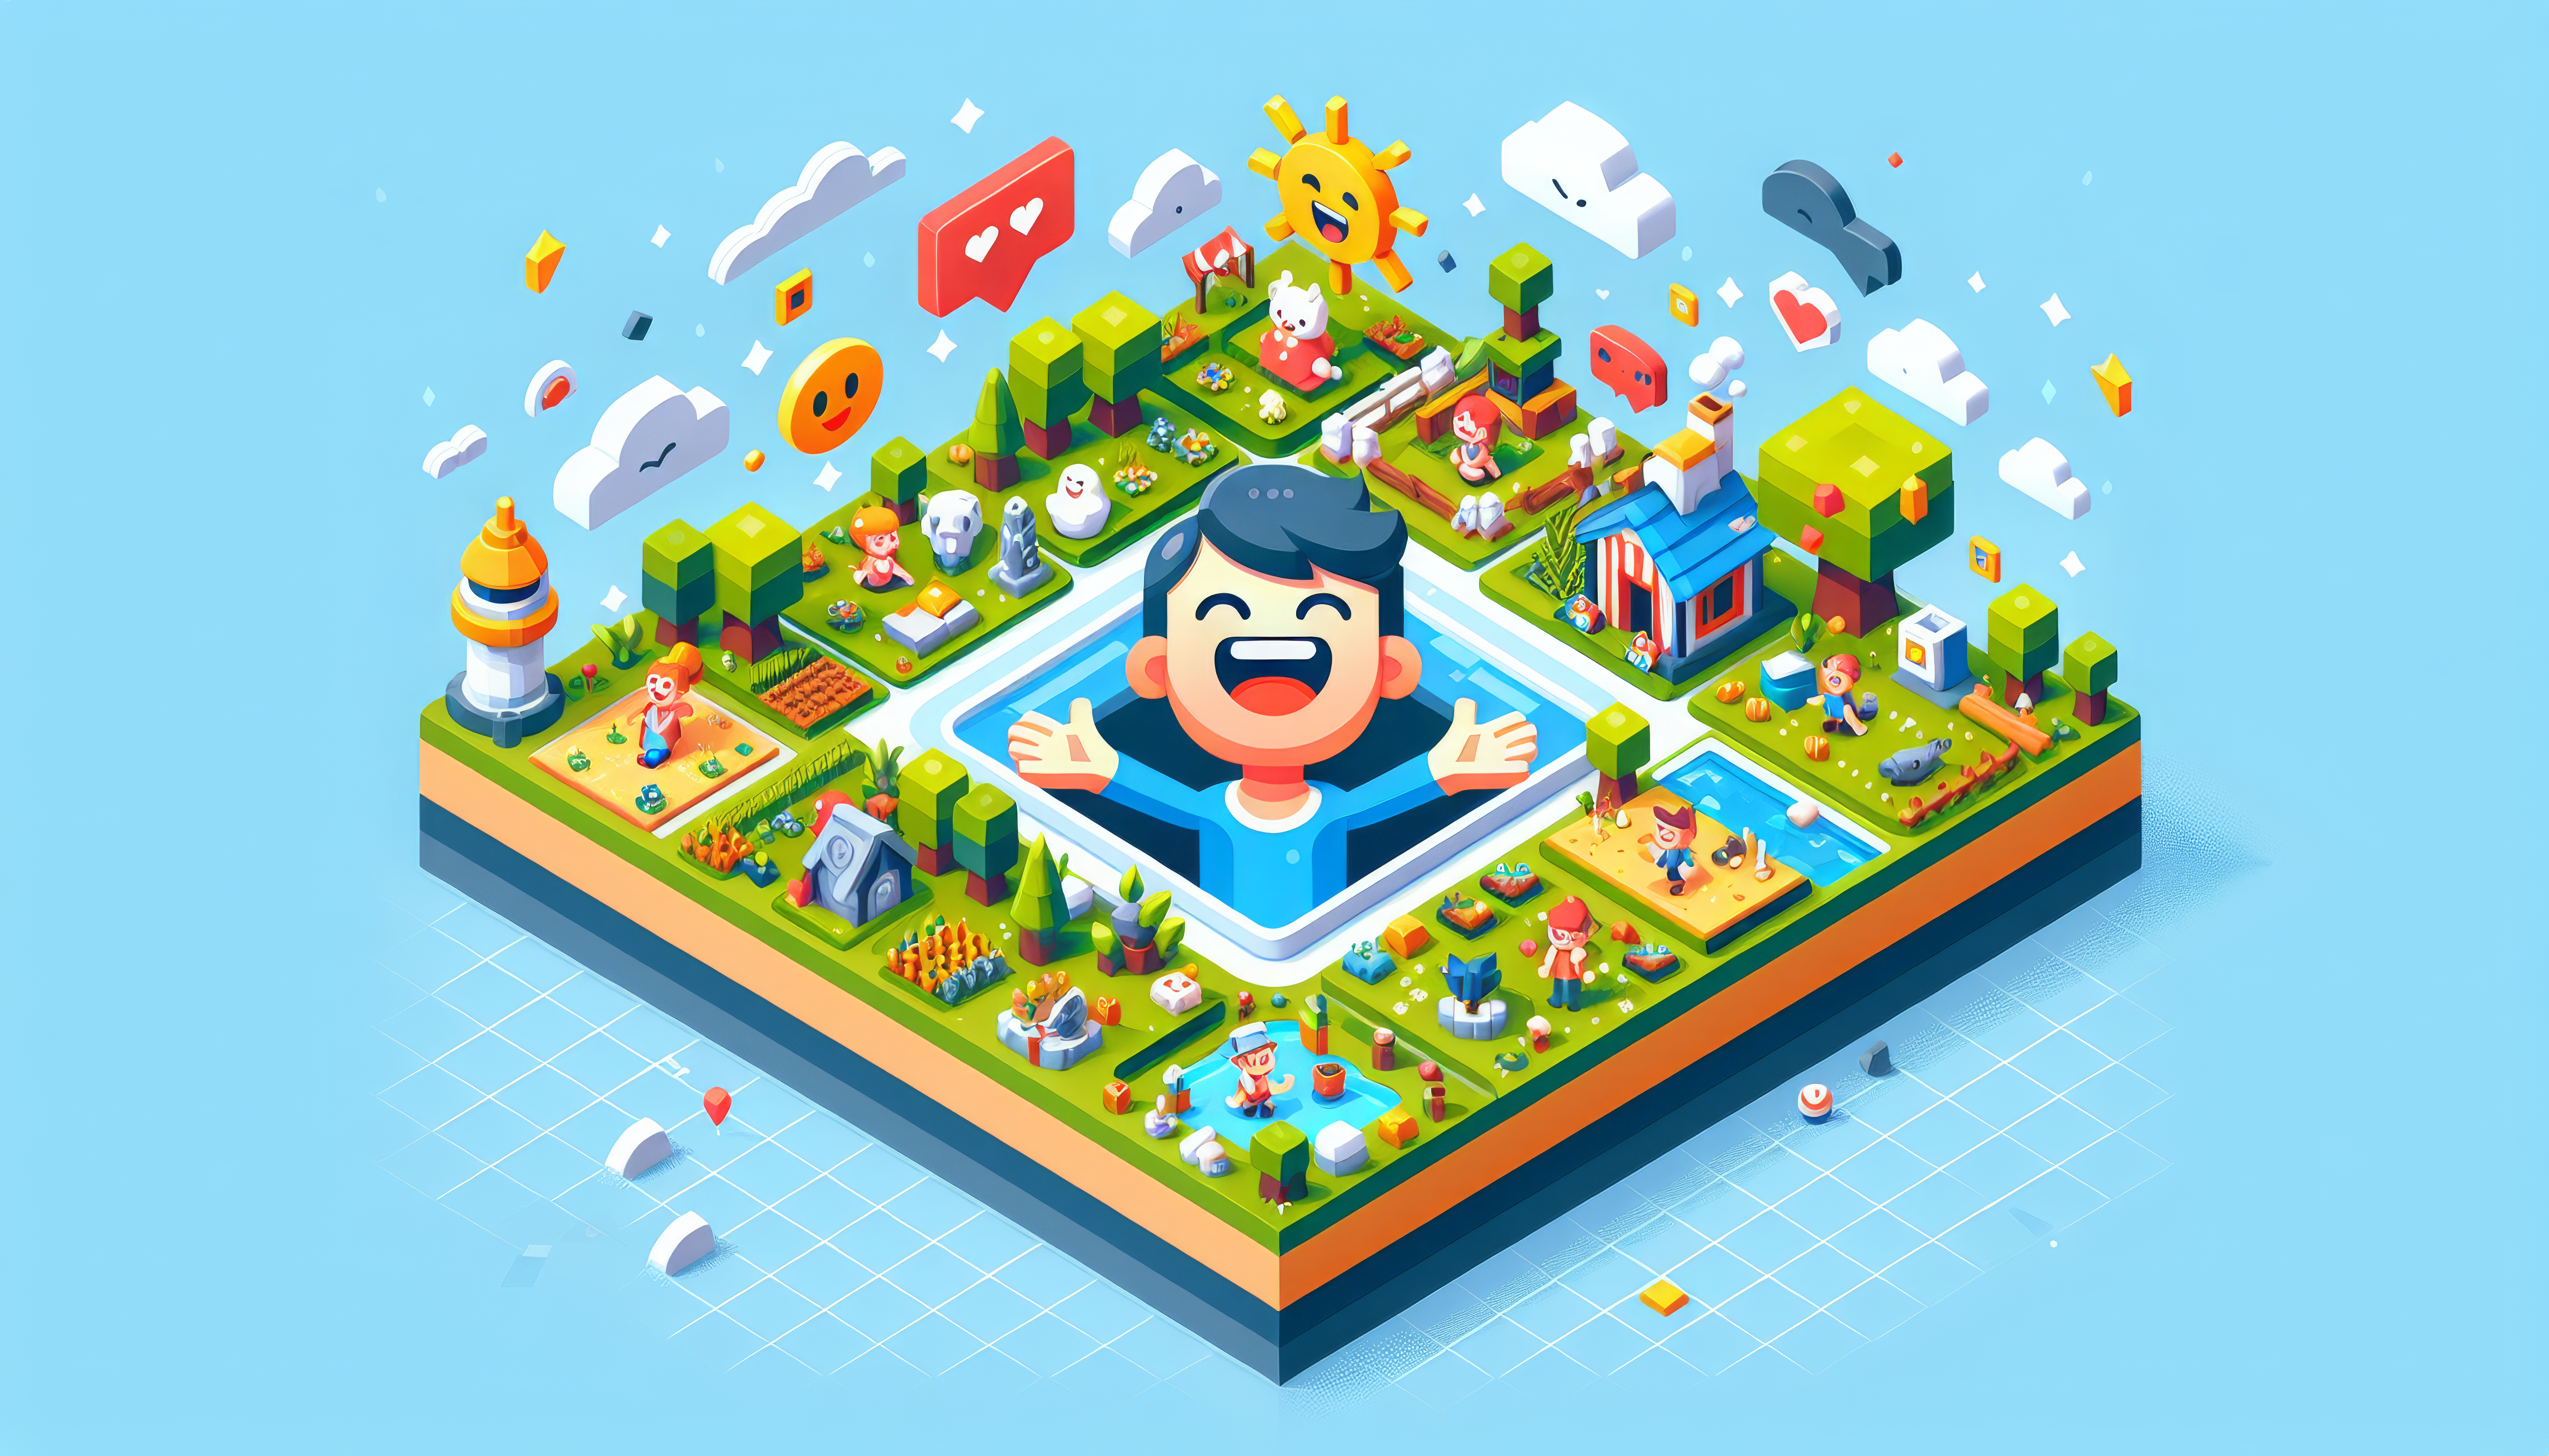 Happy animated character in a vibrant isometric city HD desktop wallpaper.